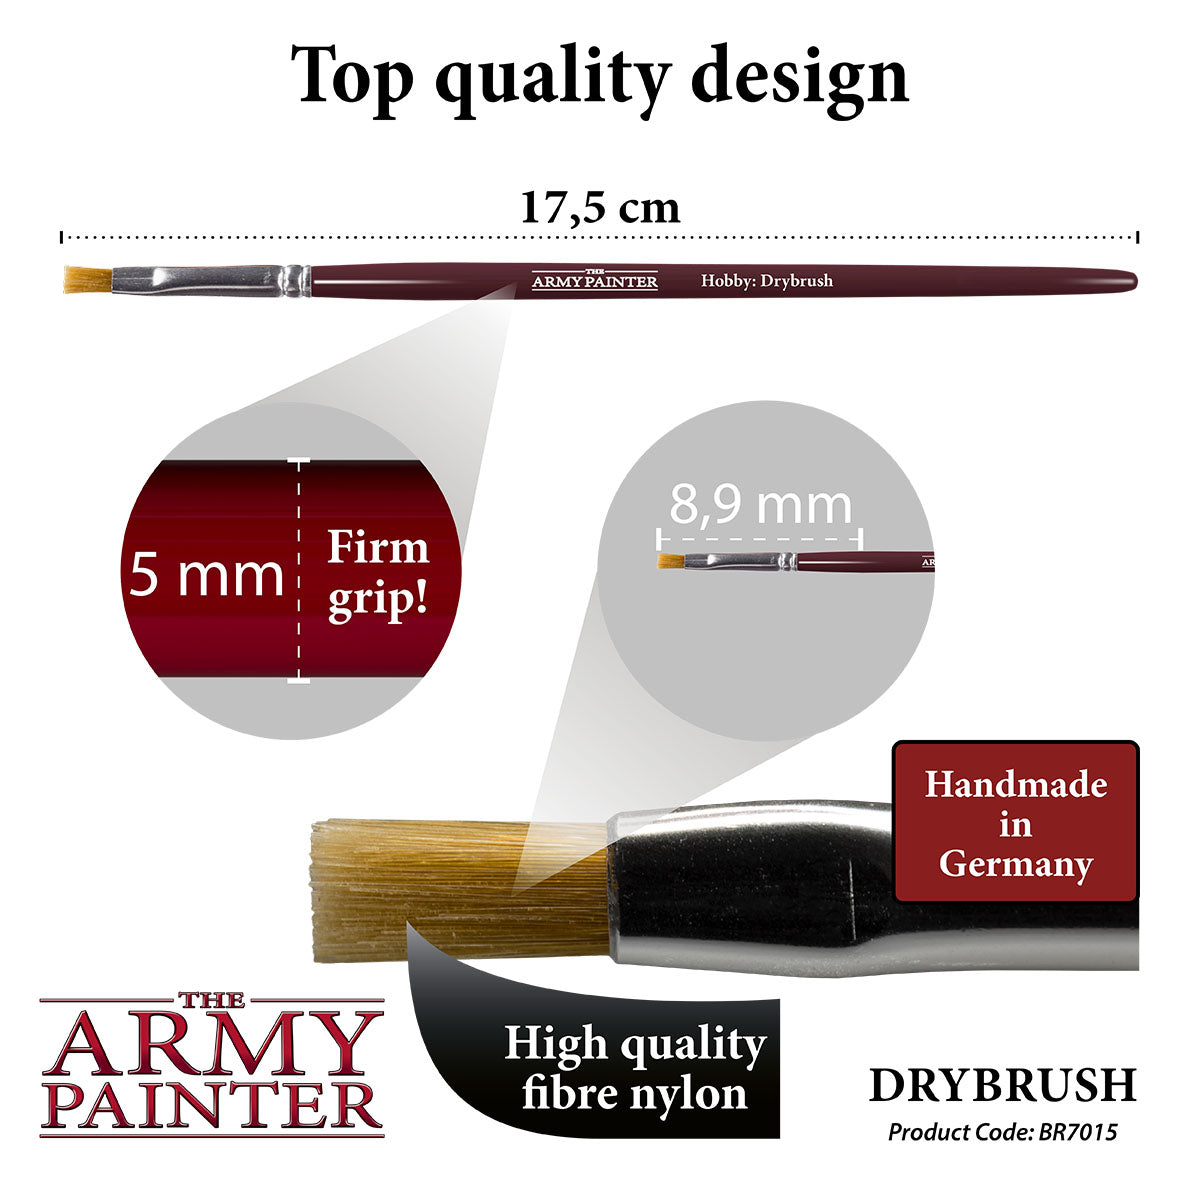 Army Painter Brushes 